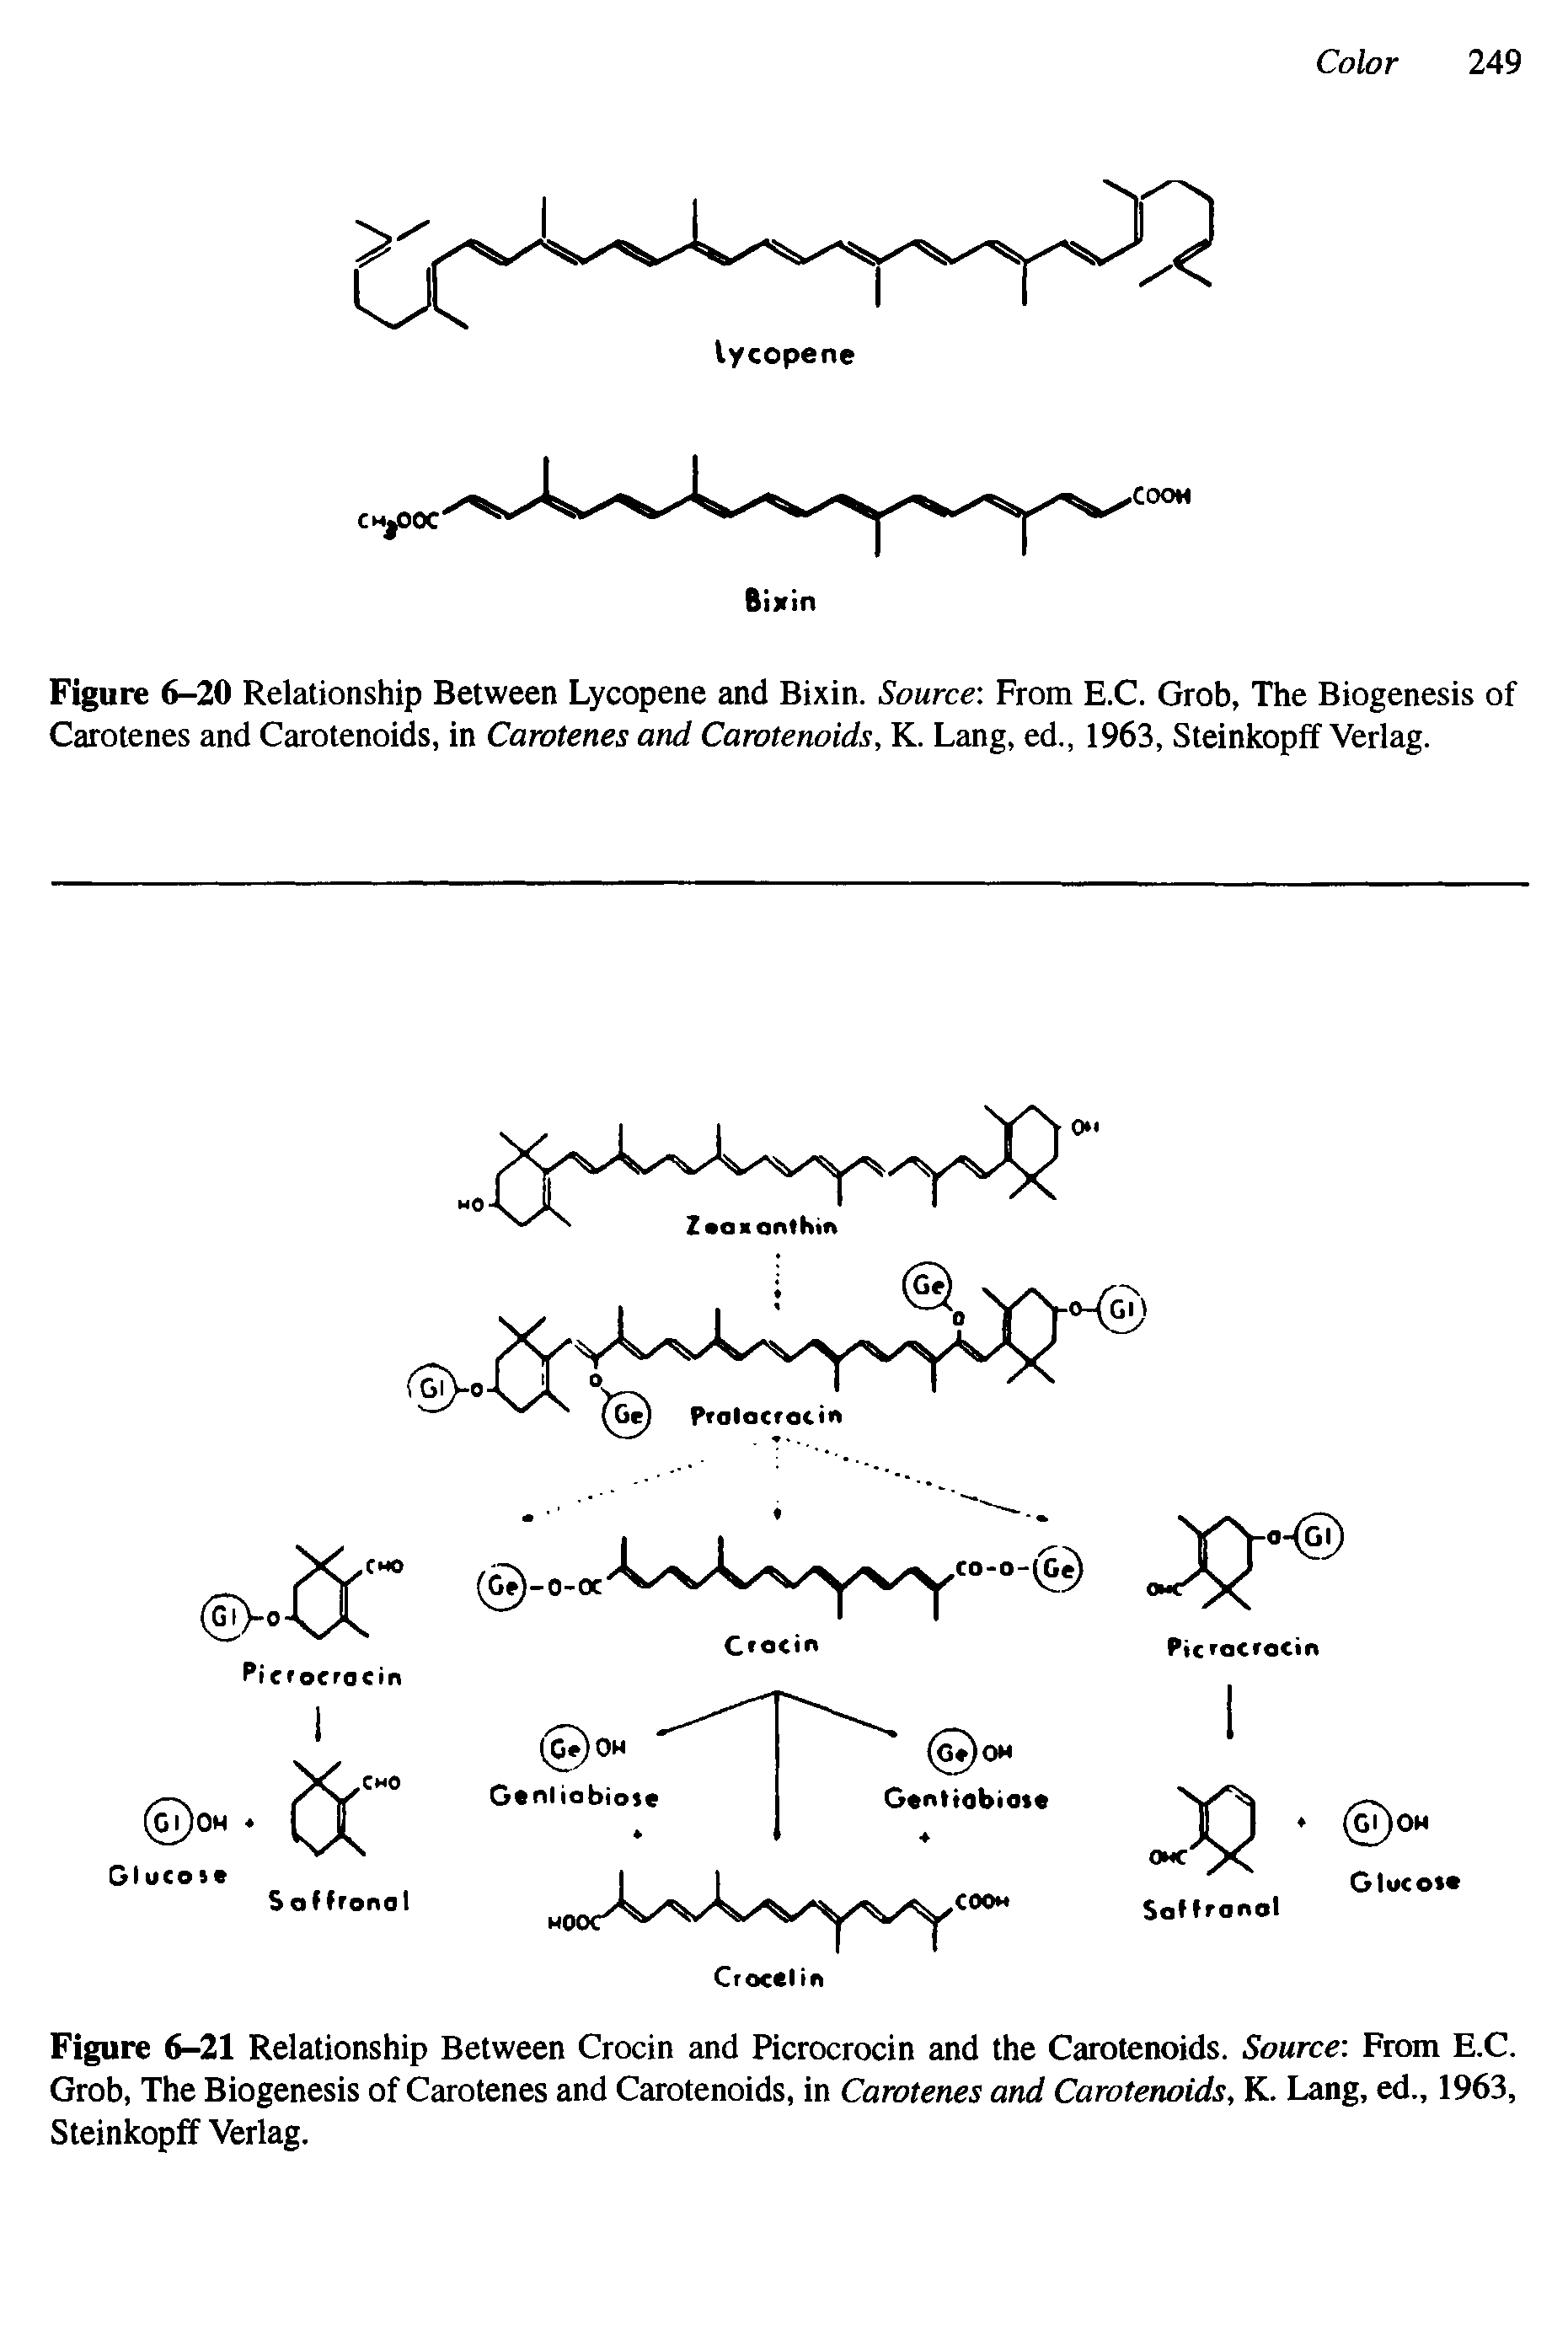 Figure 6-21 Relationship Between Crocin and Picrocrocin and the Carotenoids. Source From E.C. Grob, The Biogenesis of Carotenes and Carotenoids, in Carotenes and Carotenoids, K. Lang, ed., 1963, Steinkopff Verlag.